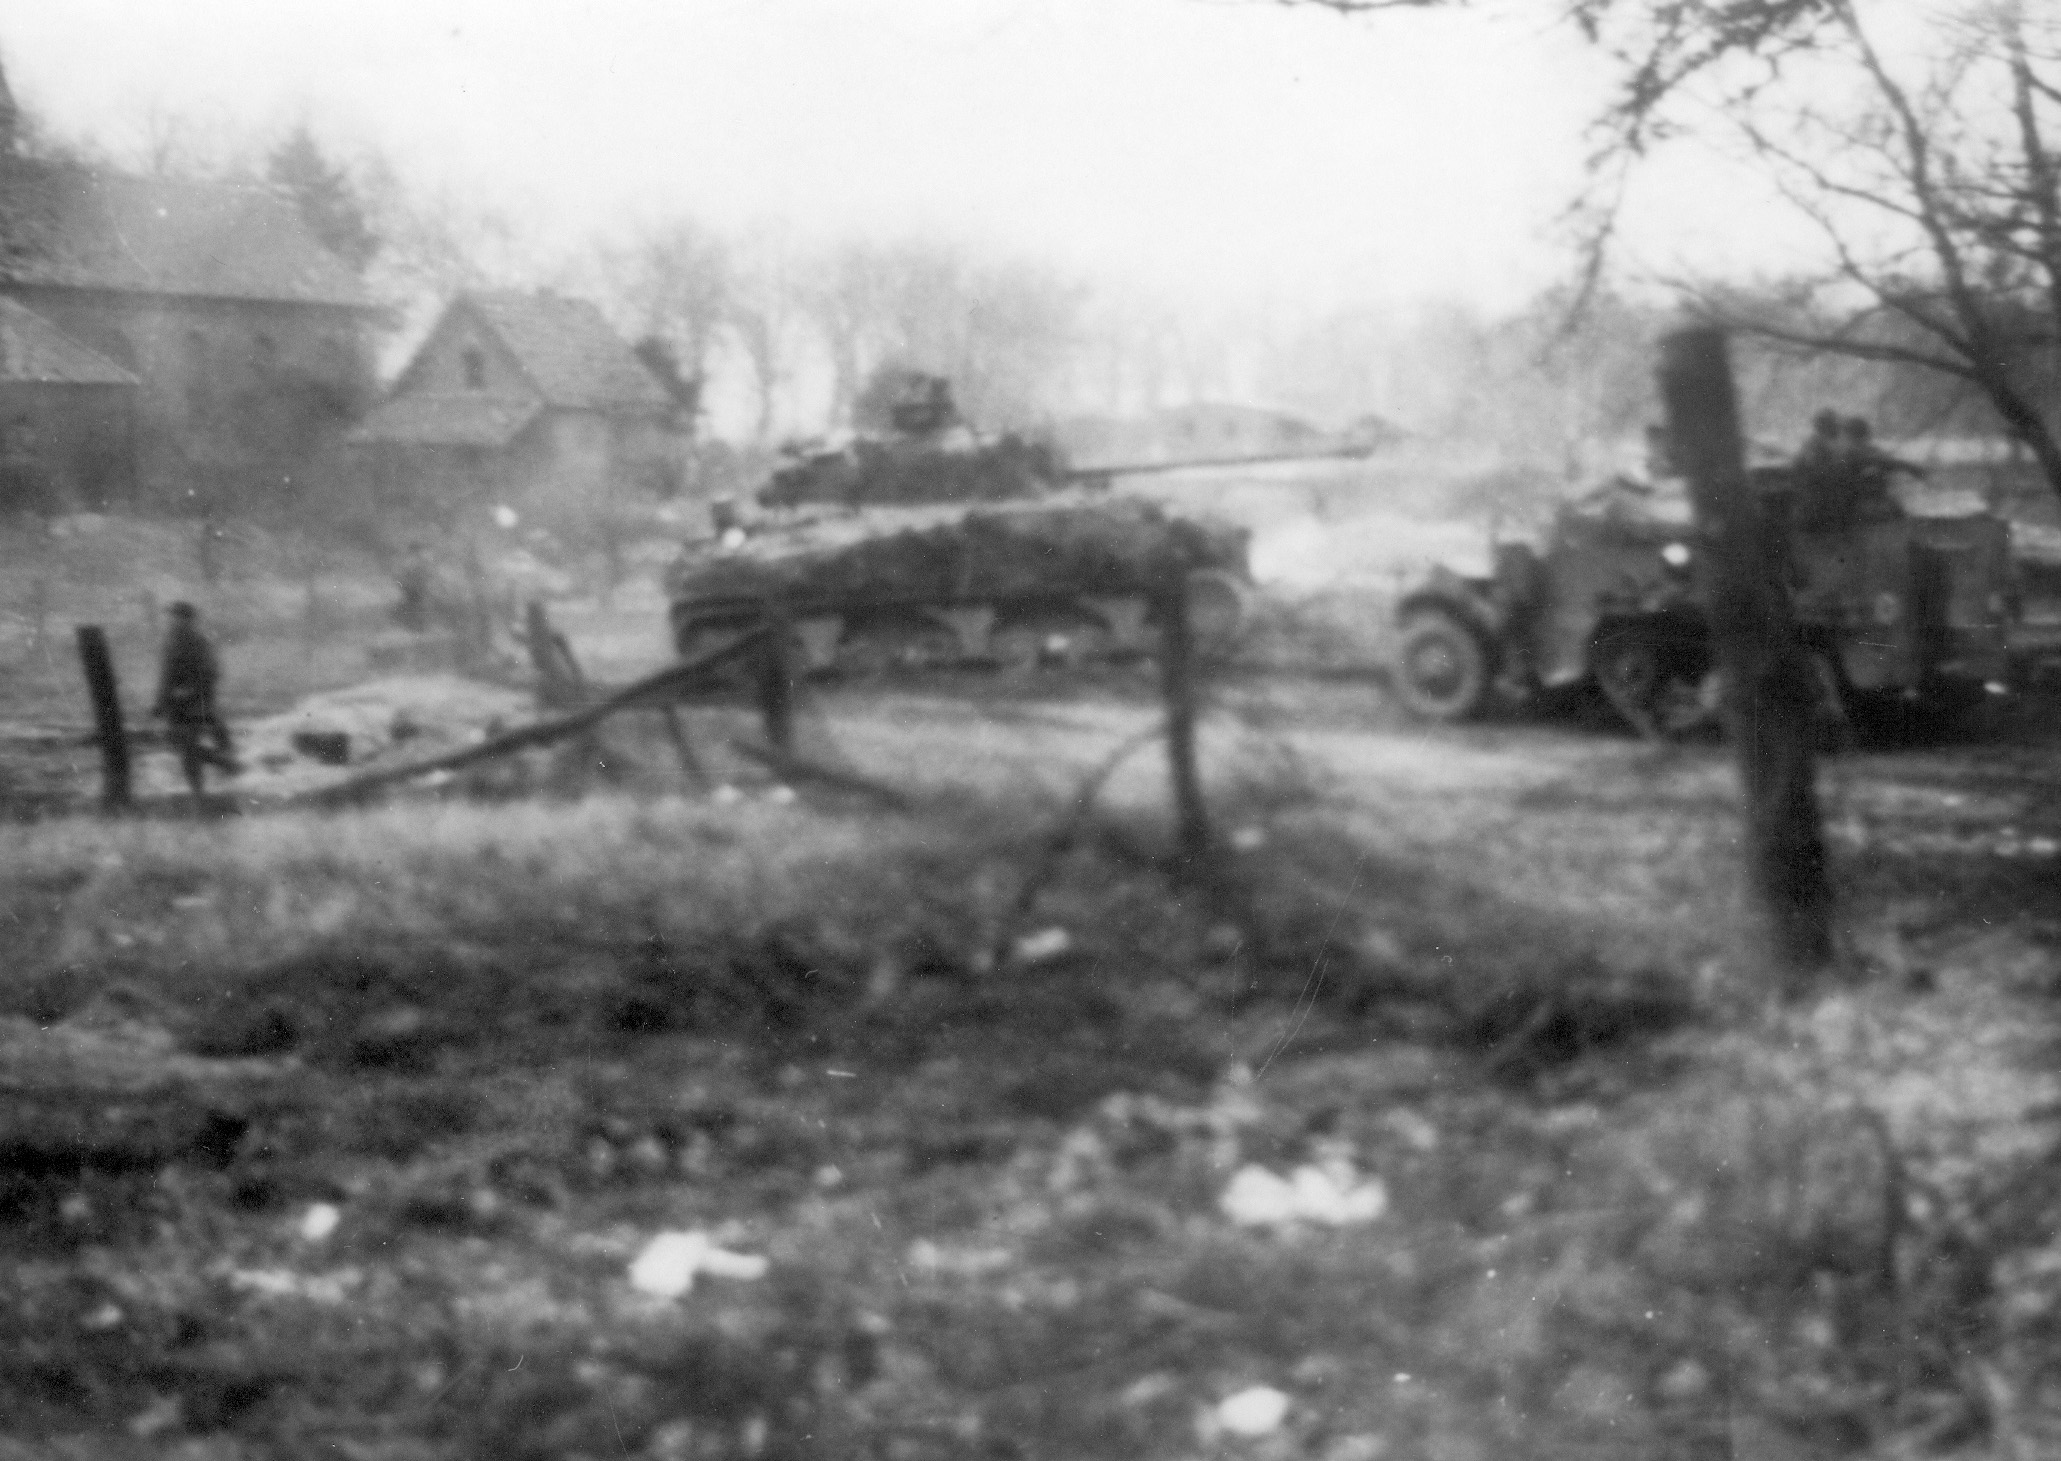 A Sherman “Firefly” and M3 half-track, part of the 15th Scottish Division, reach the Canadian paratroopers late in the day on March 24.